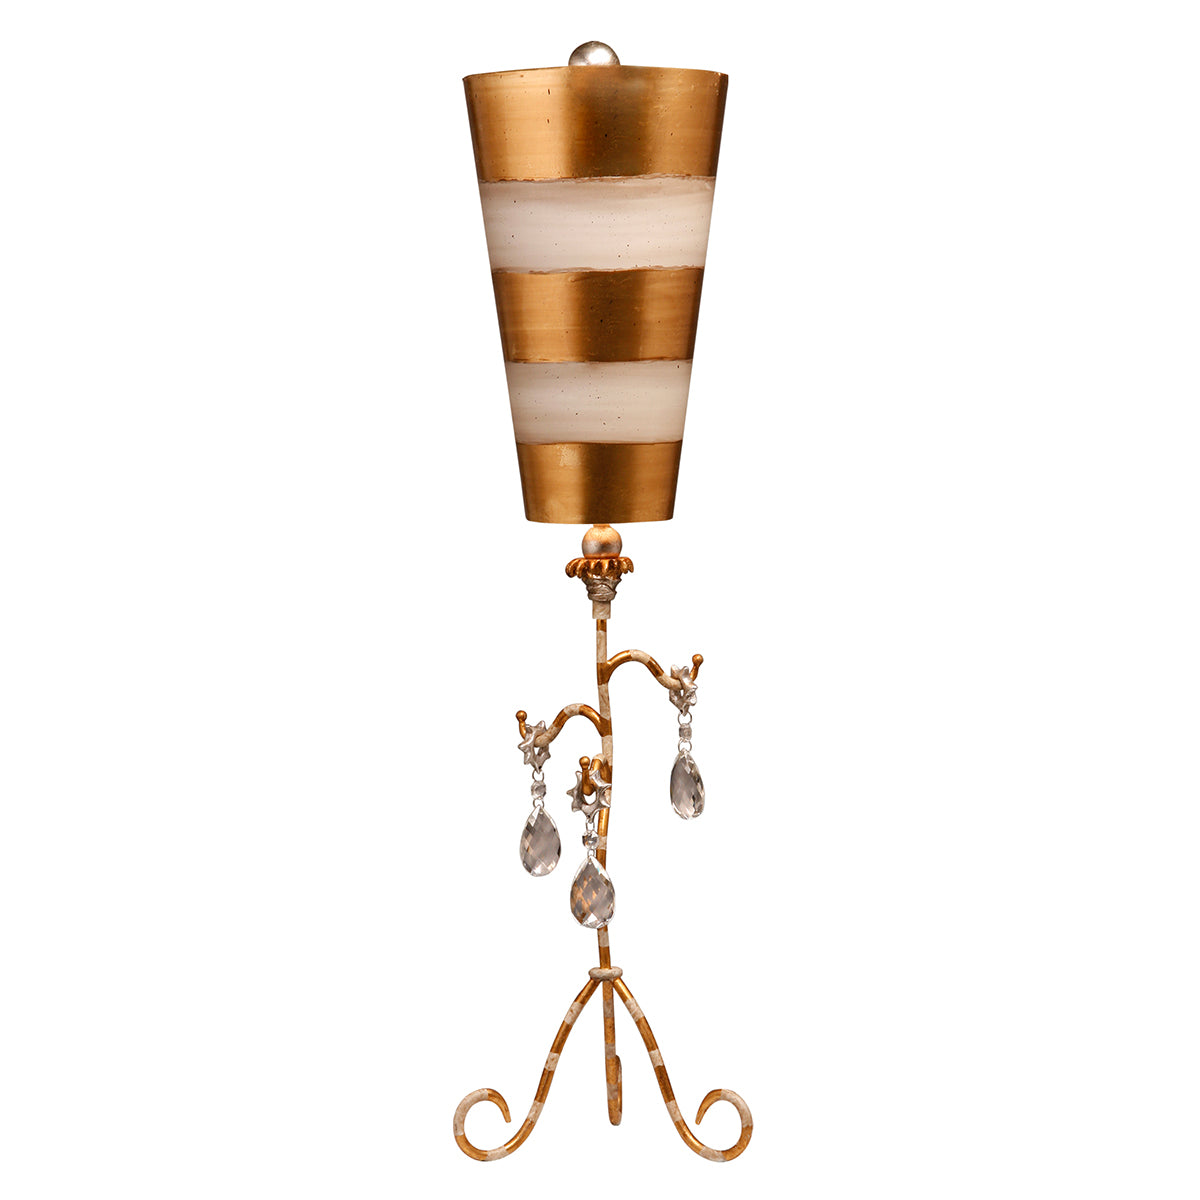 Lucas + McKearn One Light Table Lamp from the Tivoli collection in Cream And Gold Striped finish